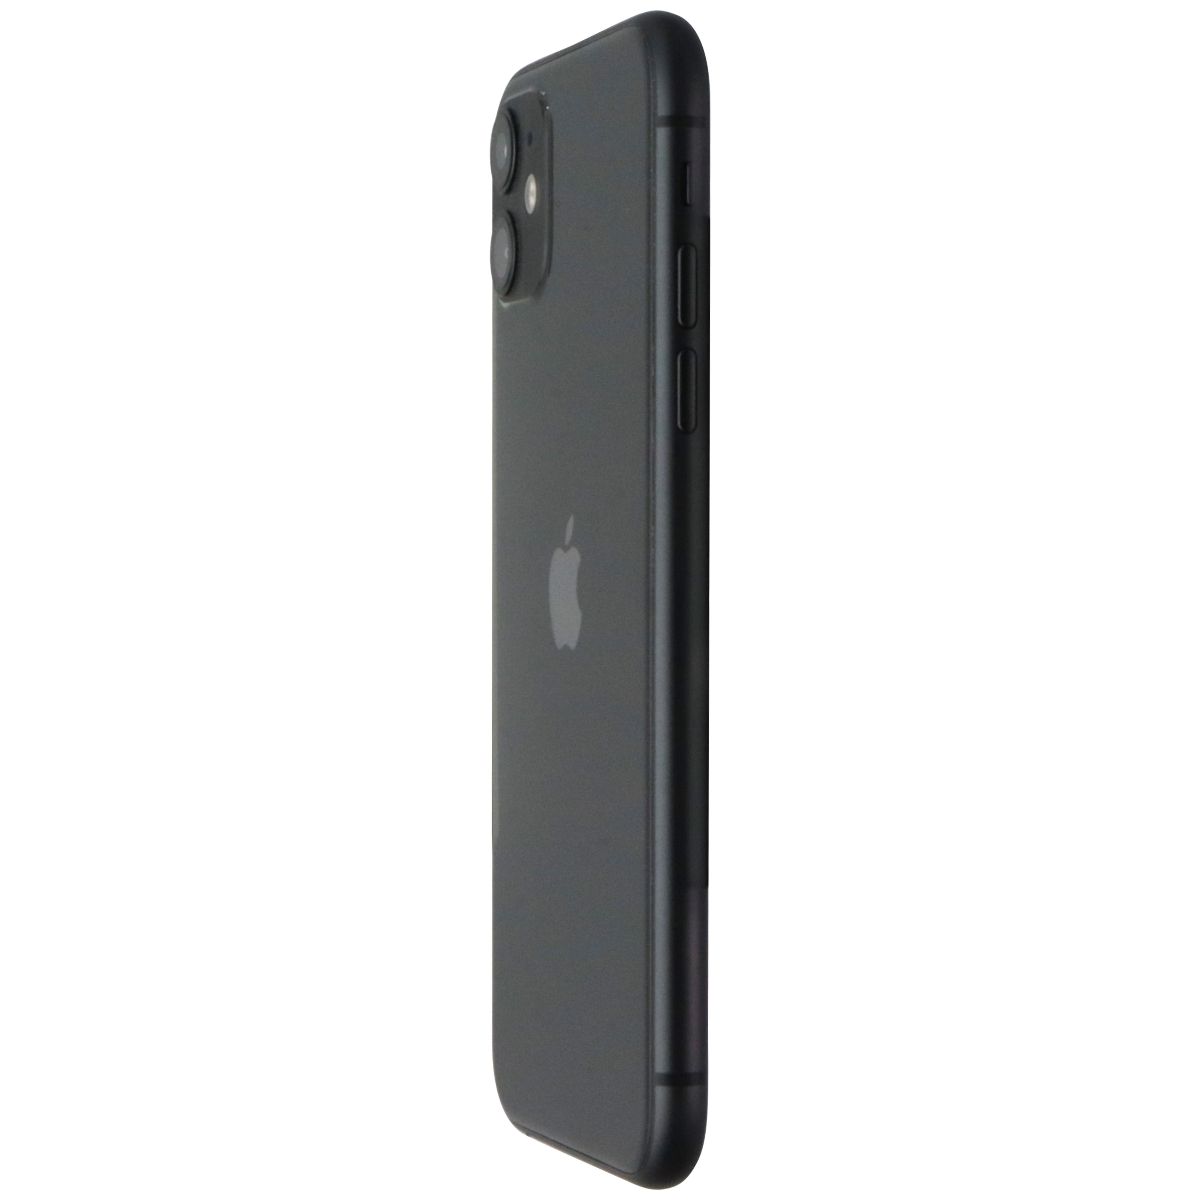 Apple iPhone 11 (6.1-inch) A2111 Unlocked - 64GB / Black - Bad Face ID* Cell Phones & Smartphones Apple    - Simple Cell Bulk Wholesale Pricing - USA Seller